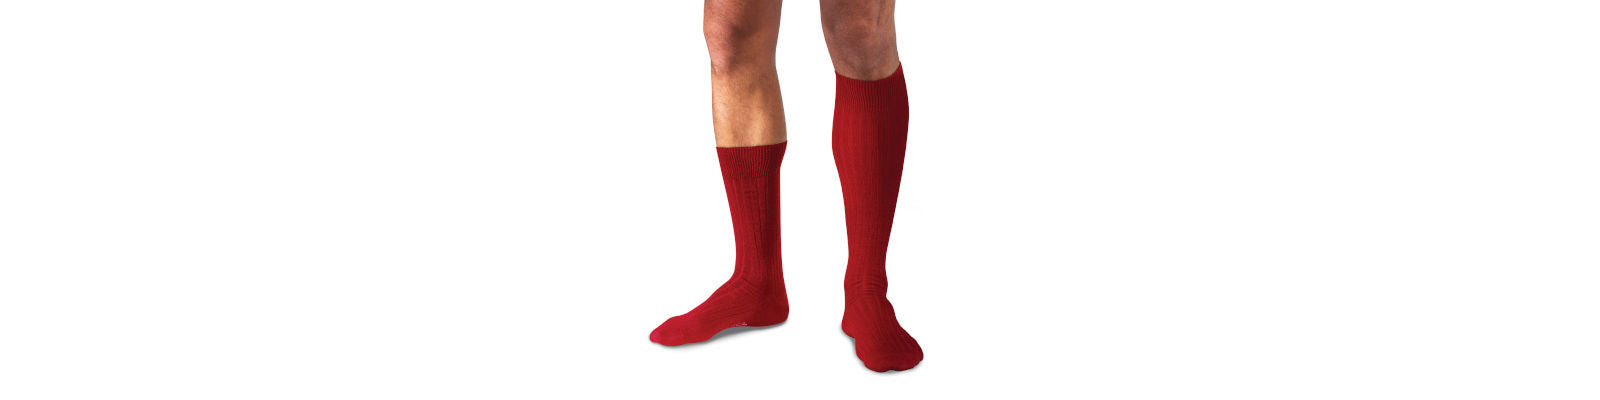 man wearing one pair of red over the calf socks and one pair of red mid calf socks